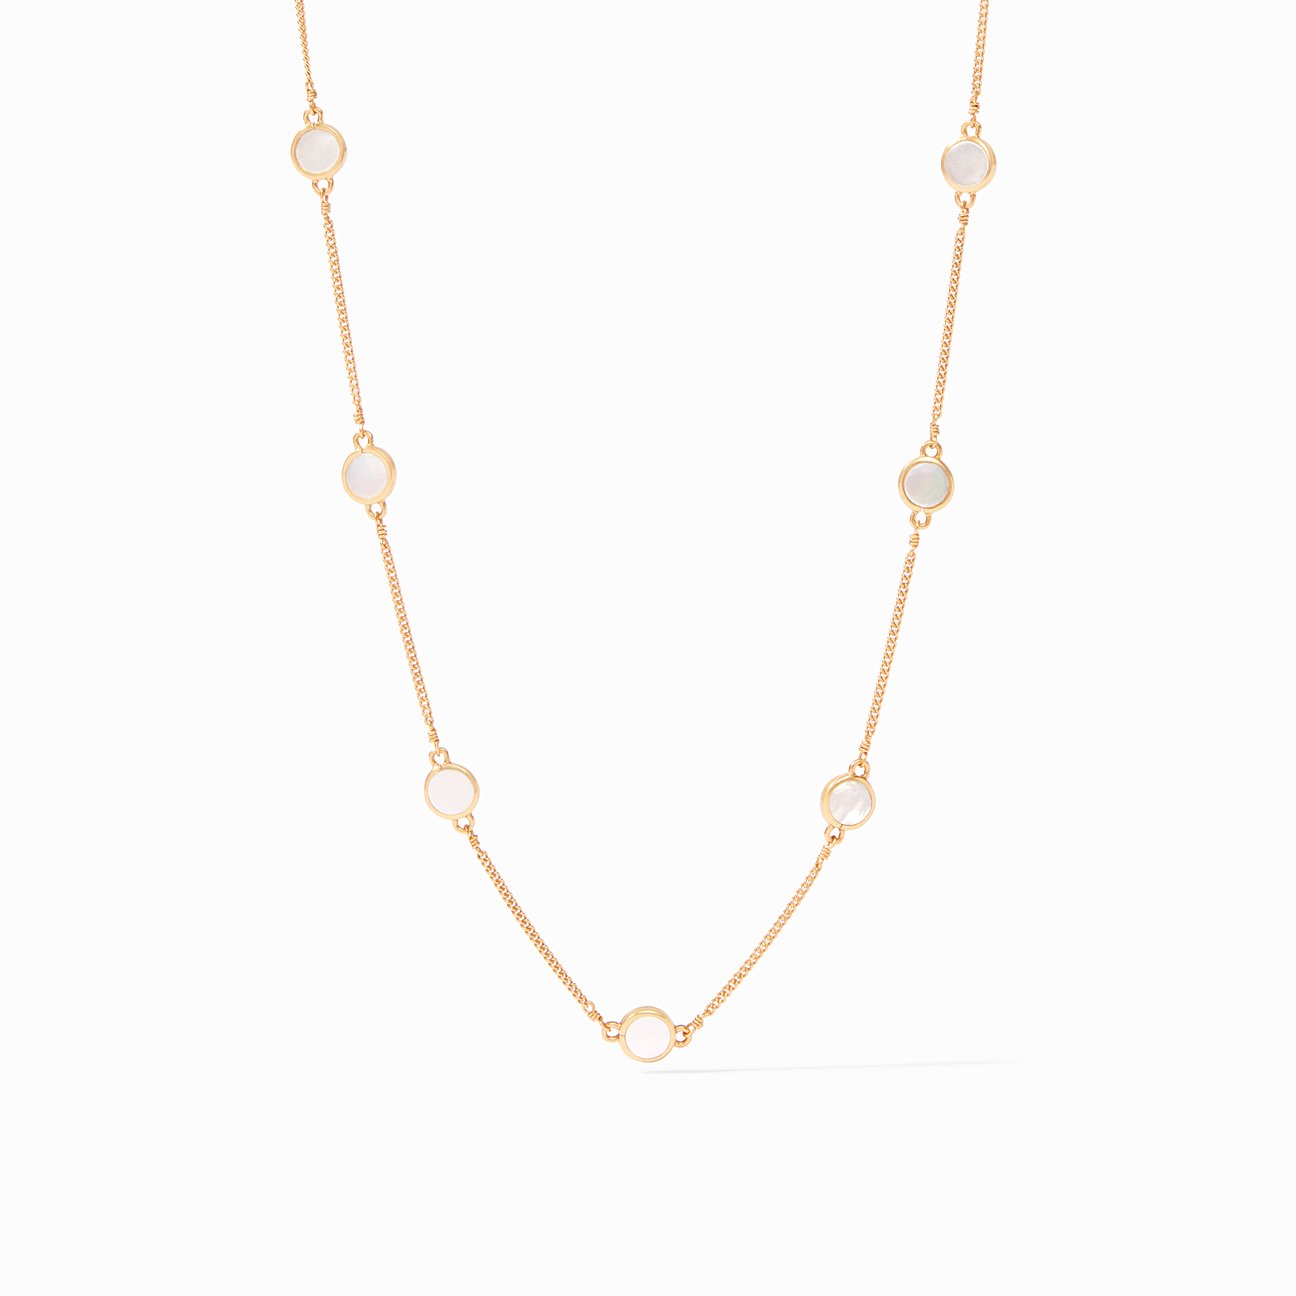 JULIE VOS VALENCIA DELICATE STATION NECKLACE - MOTHER OF PEARL